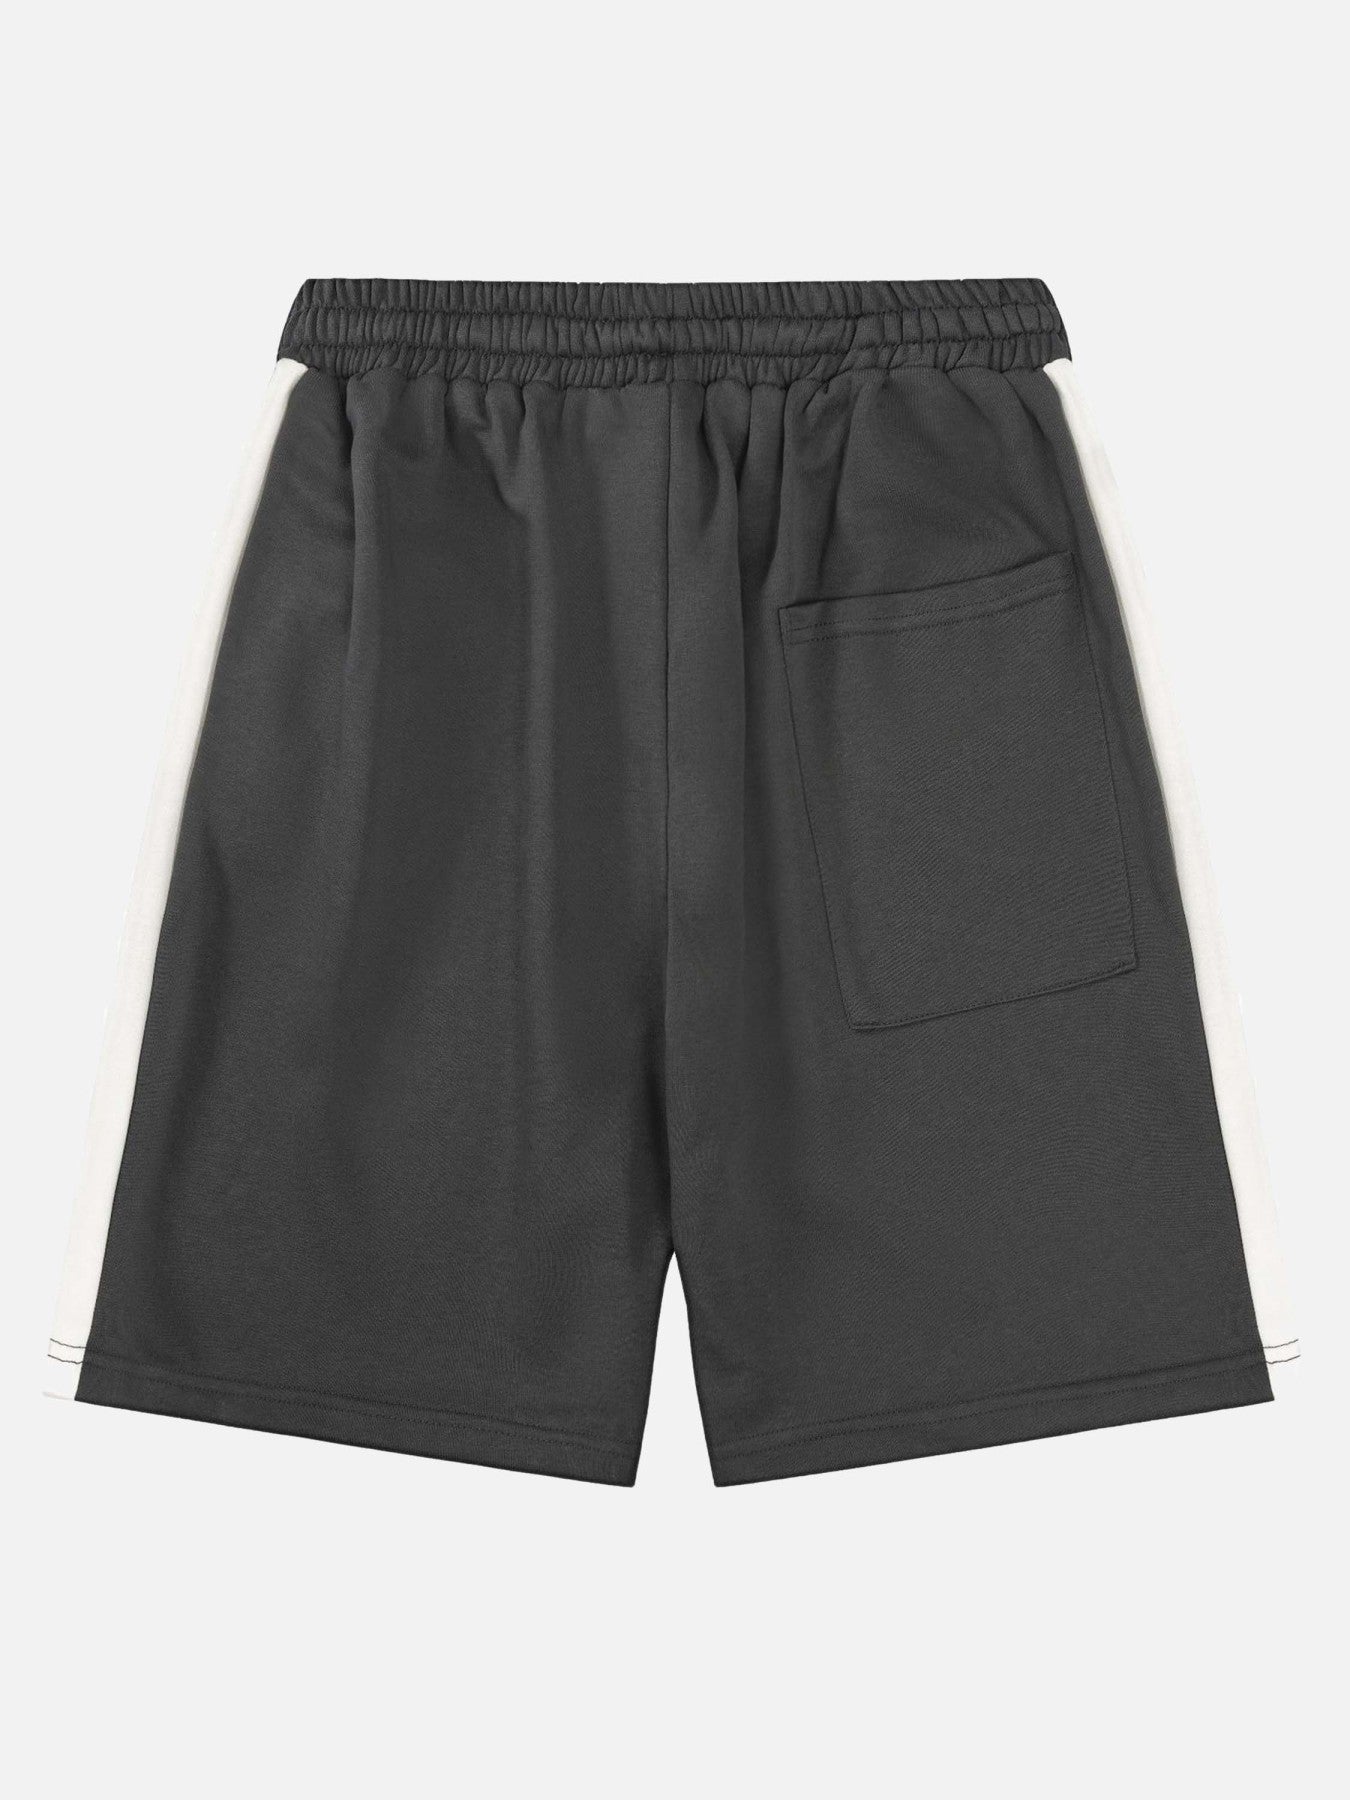 The Supermade Color-coded Printed Casual Shorts